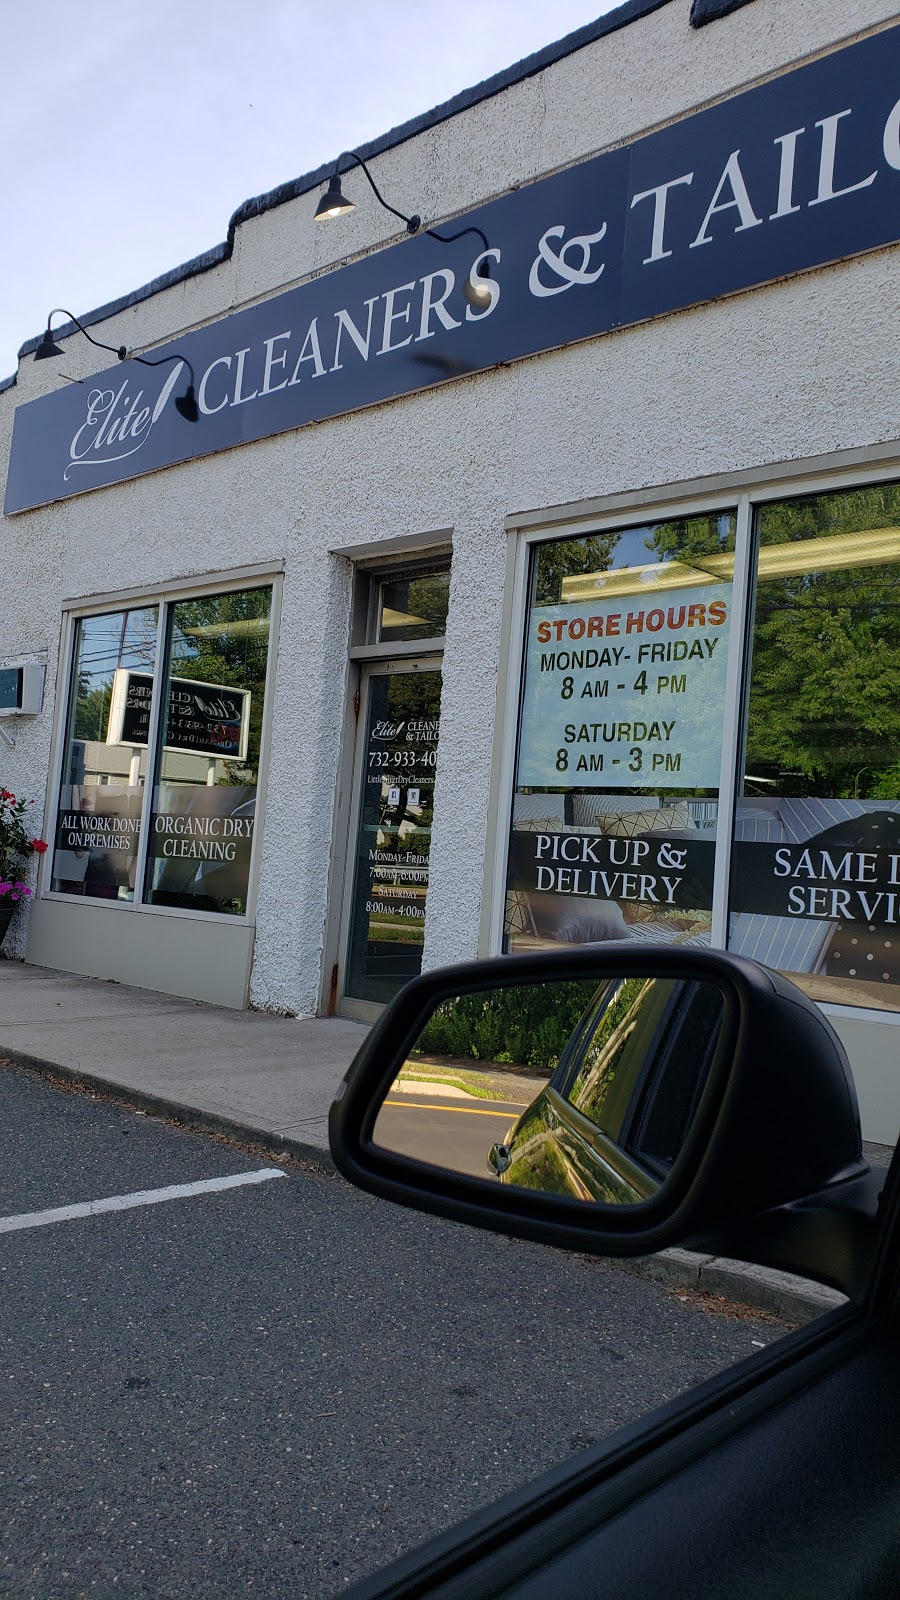 Elite Cleaners & Tailors | 601 Branch Ave, Little Silver, NJ 07739 | Phone: (732) 933-4031